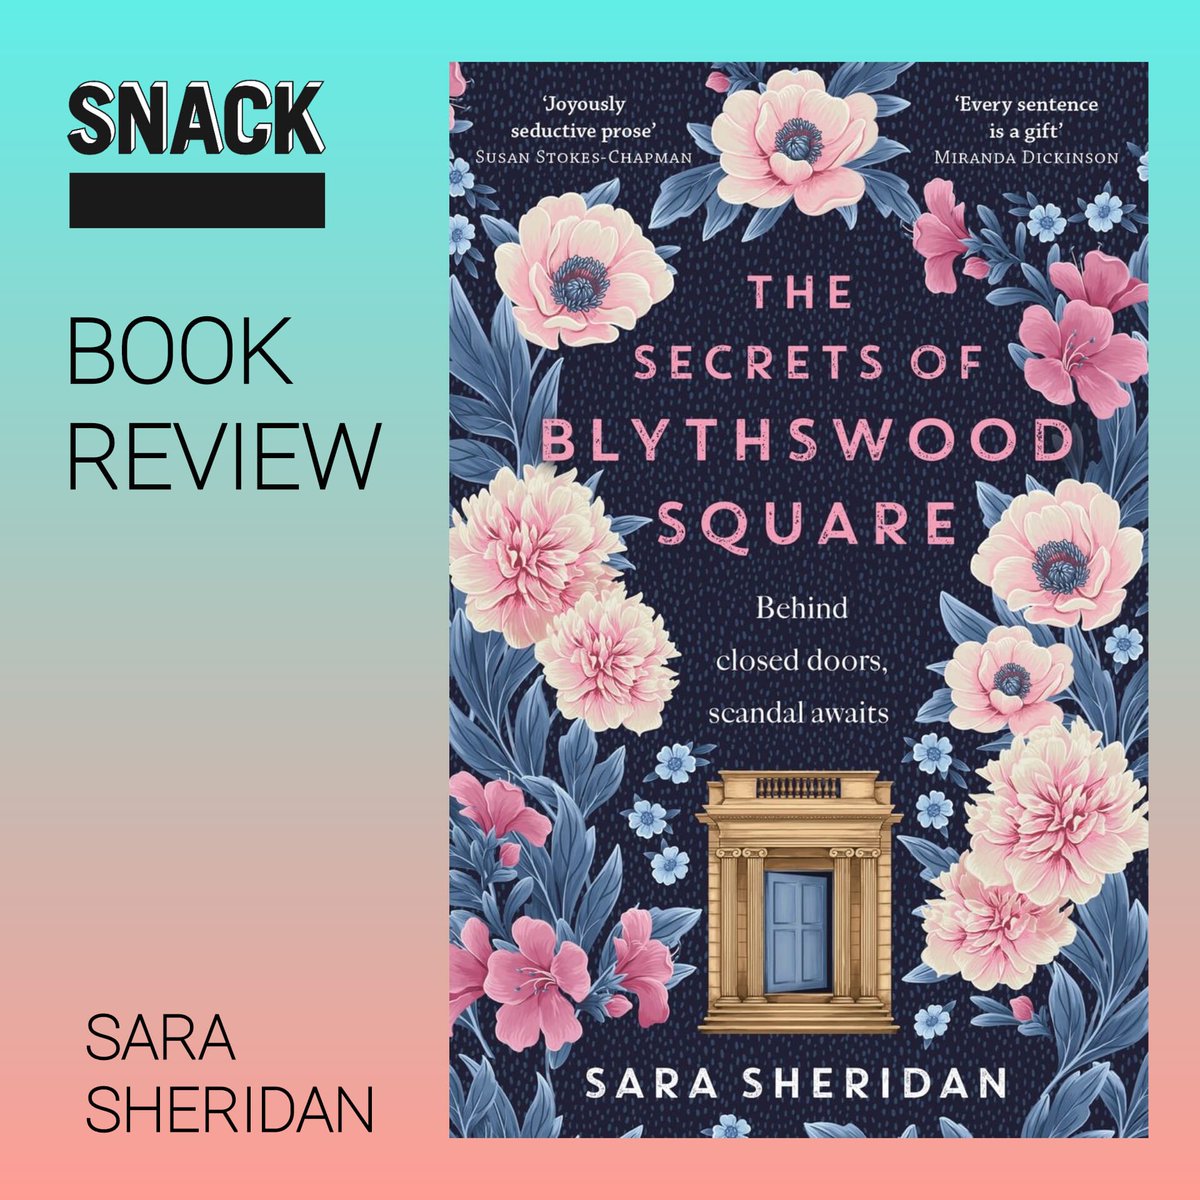 BOOK REVIEW 💛 @sarasheridan 's latest novel, The Secrets of Blythswood Square, brings new stories, characters and context to Glasgow, a city whose identity too often seems set in stone. Published by @HodderBooks Words @ScotsWhayHae snackmag.co.uk/book-review-th…